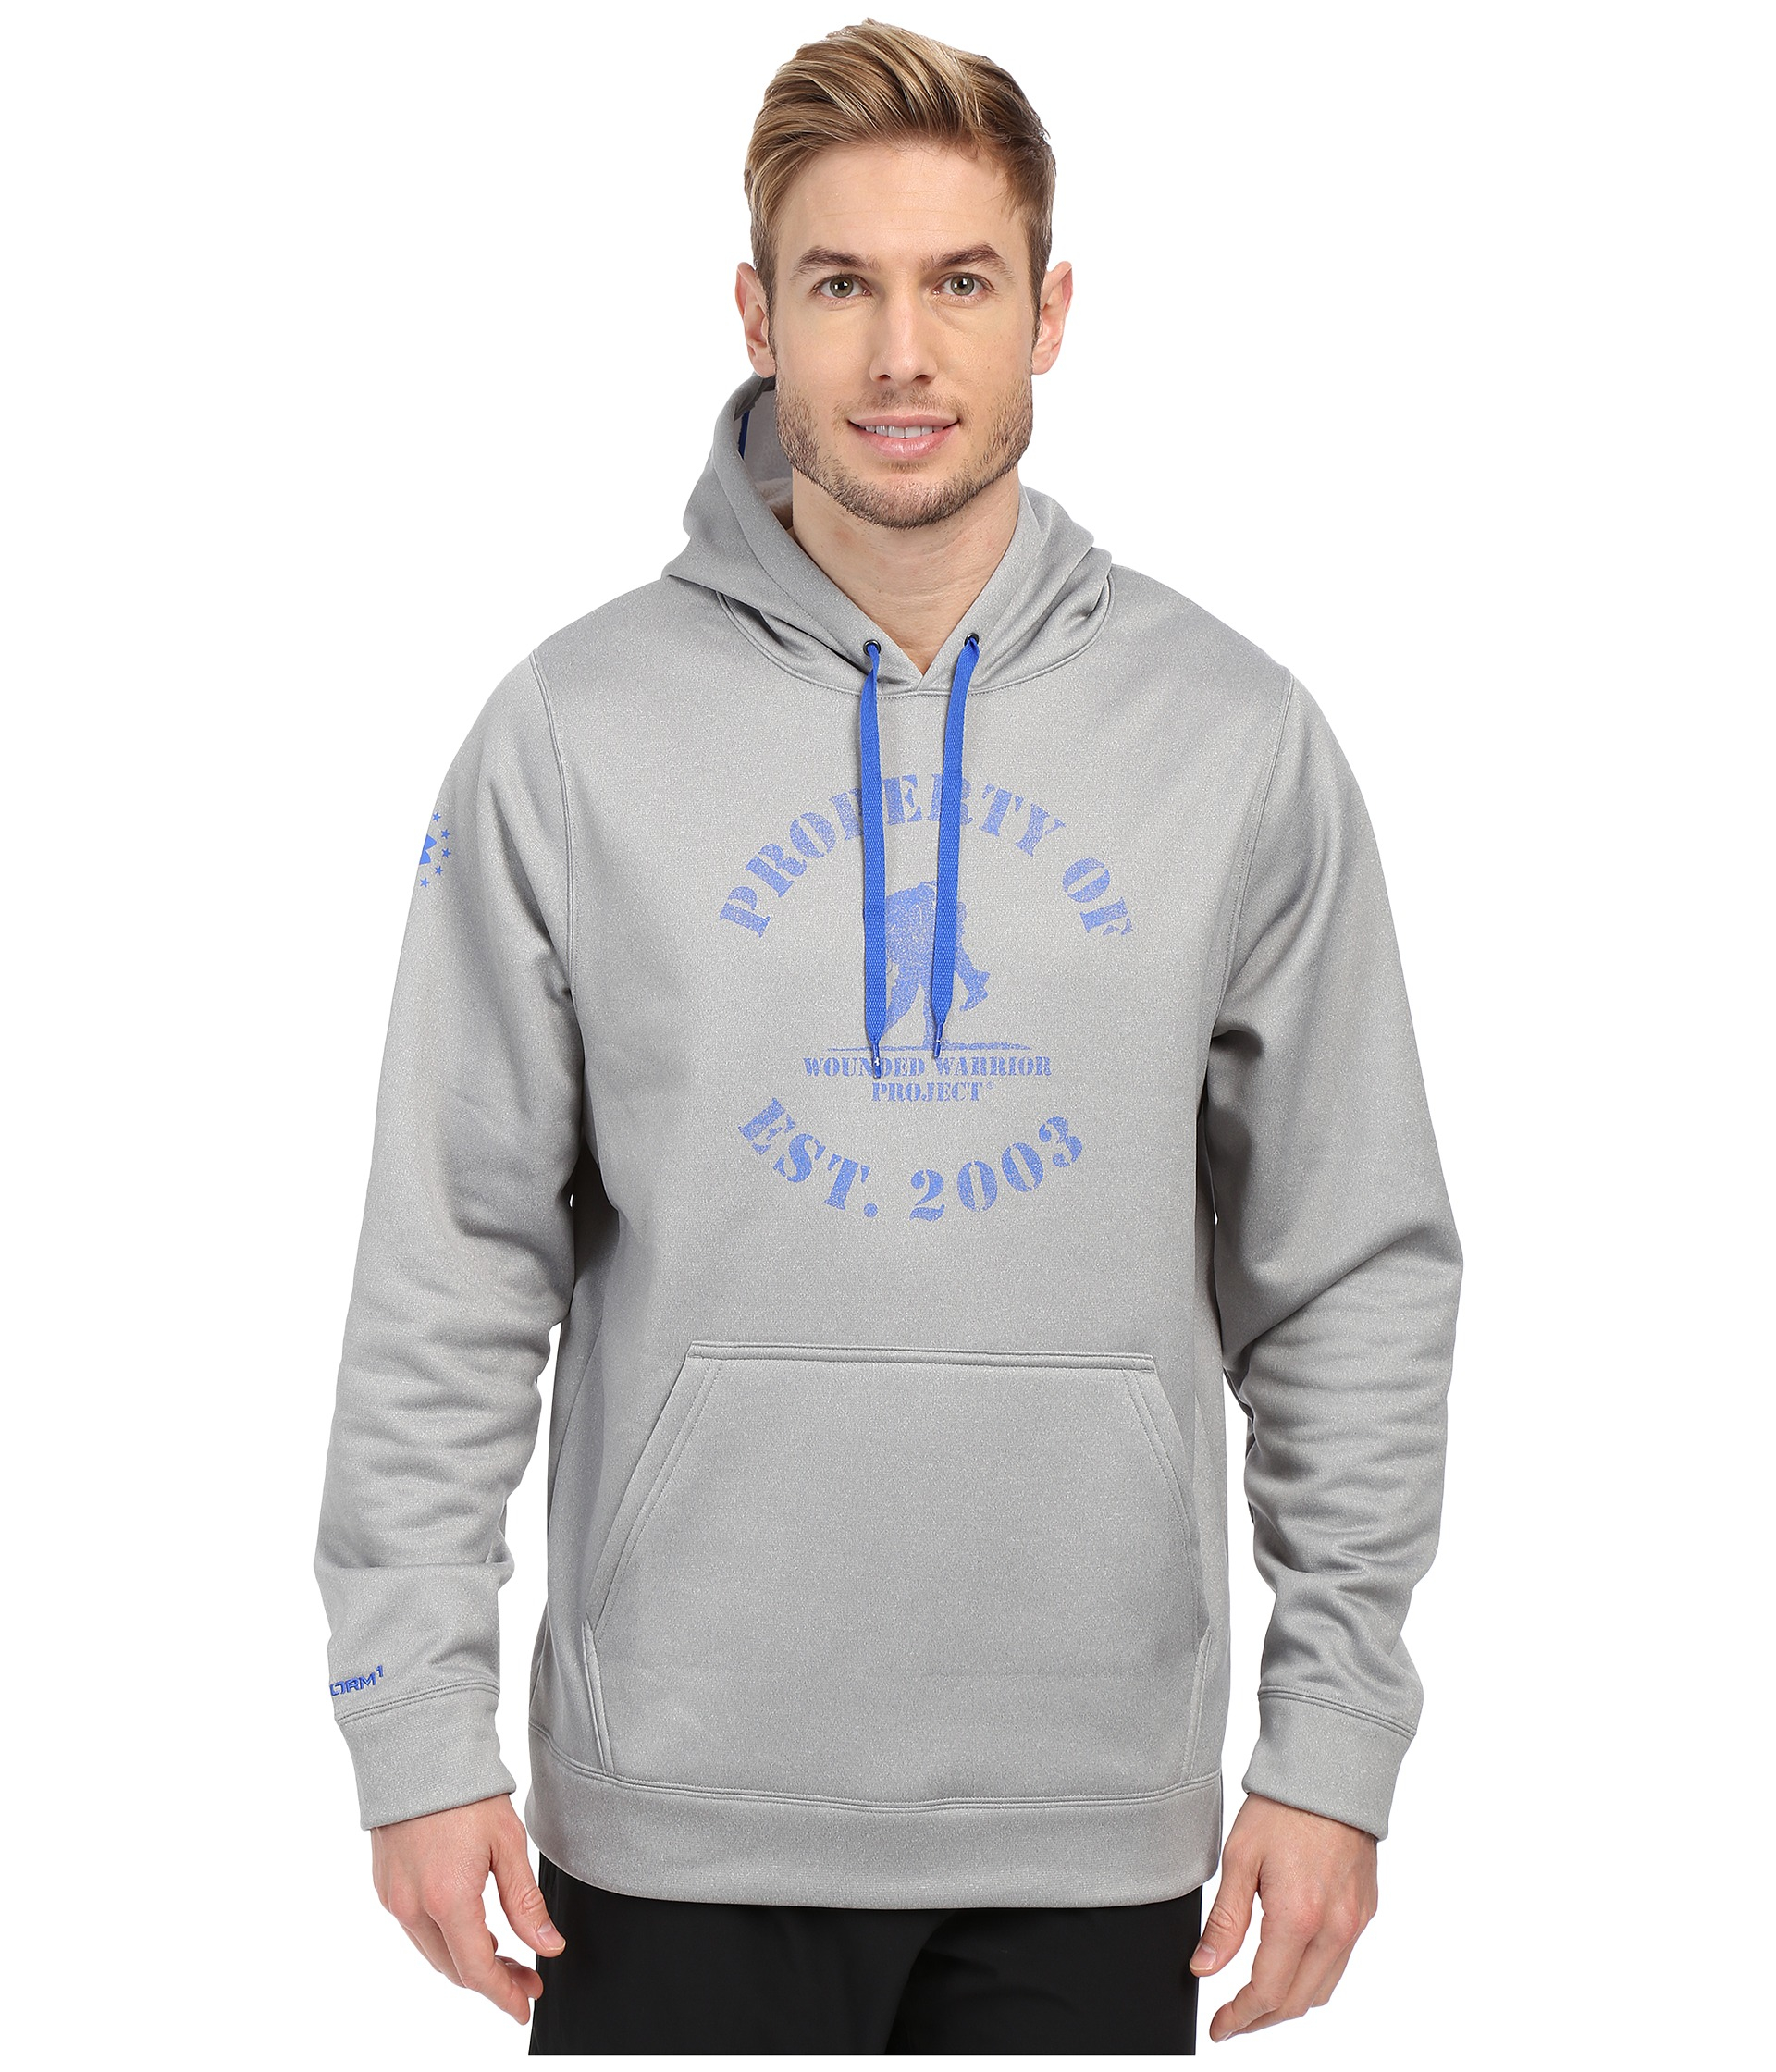 wounded warrior project under armour hoodie